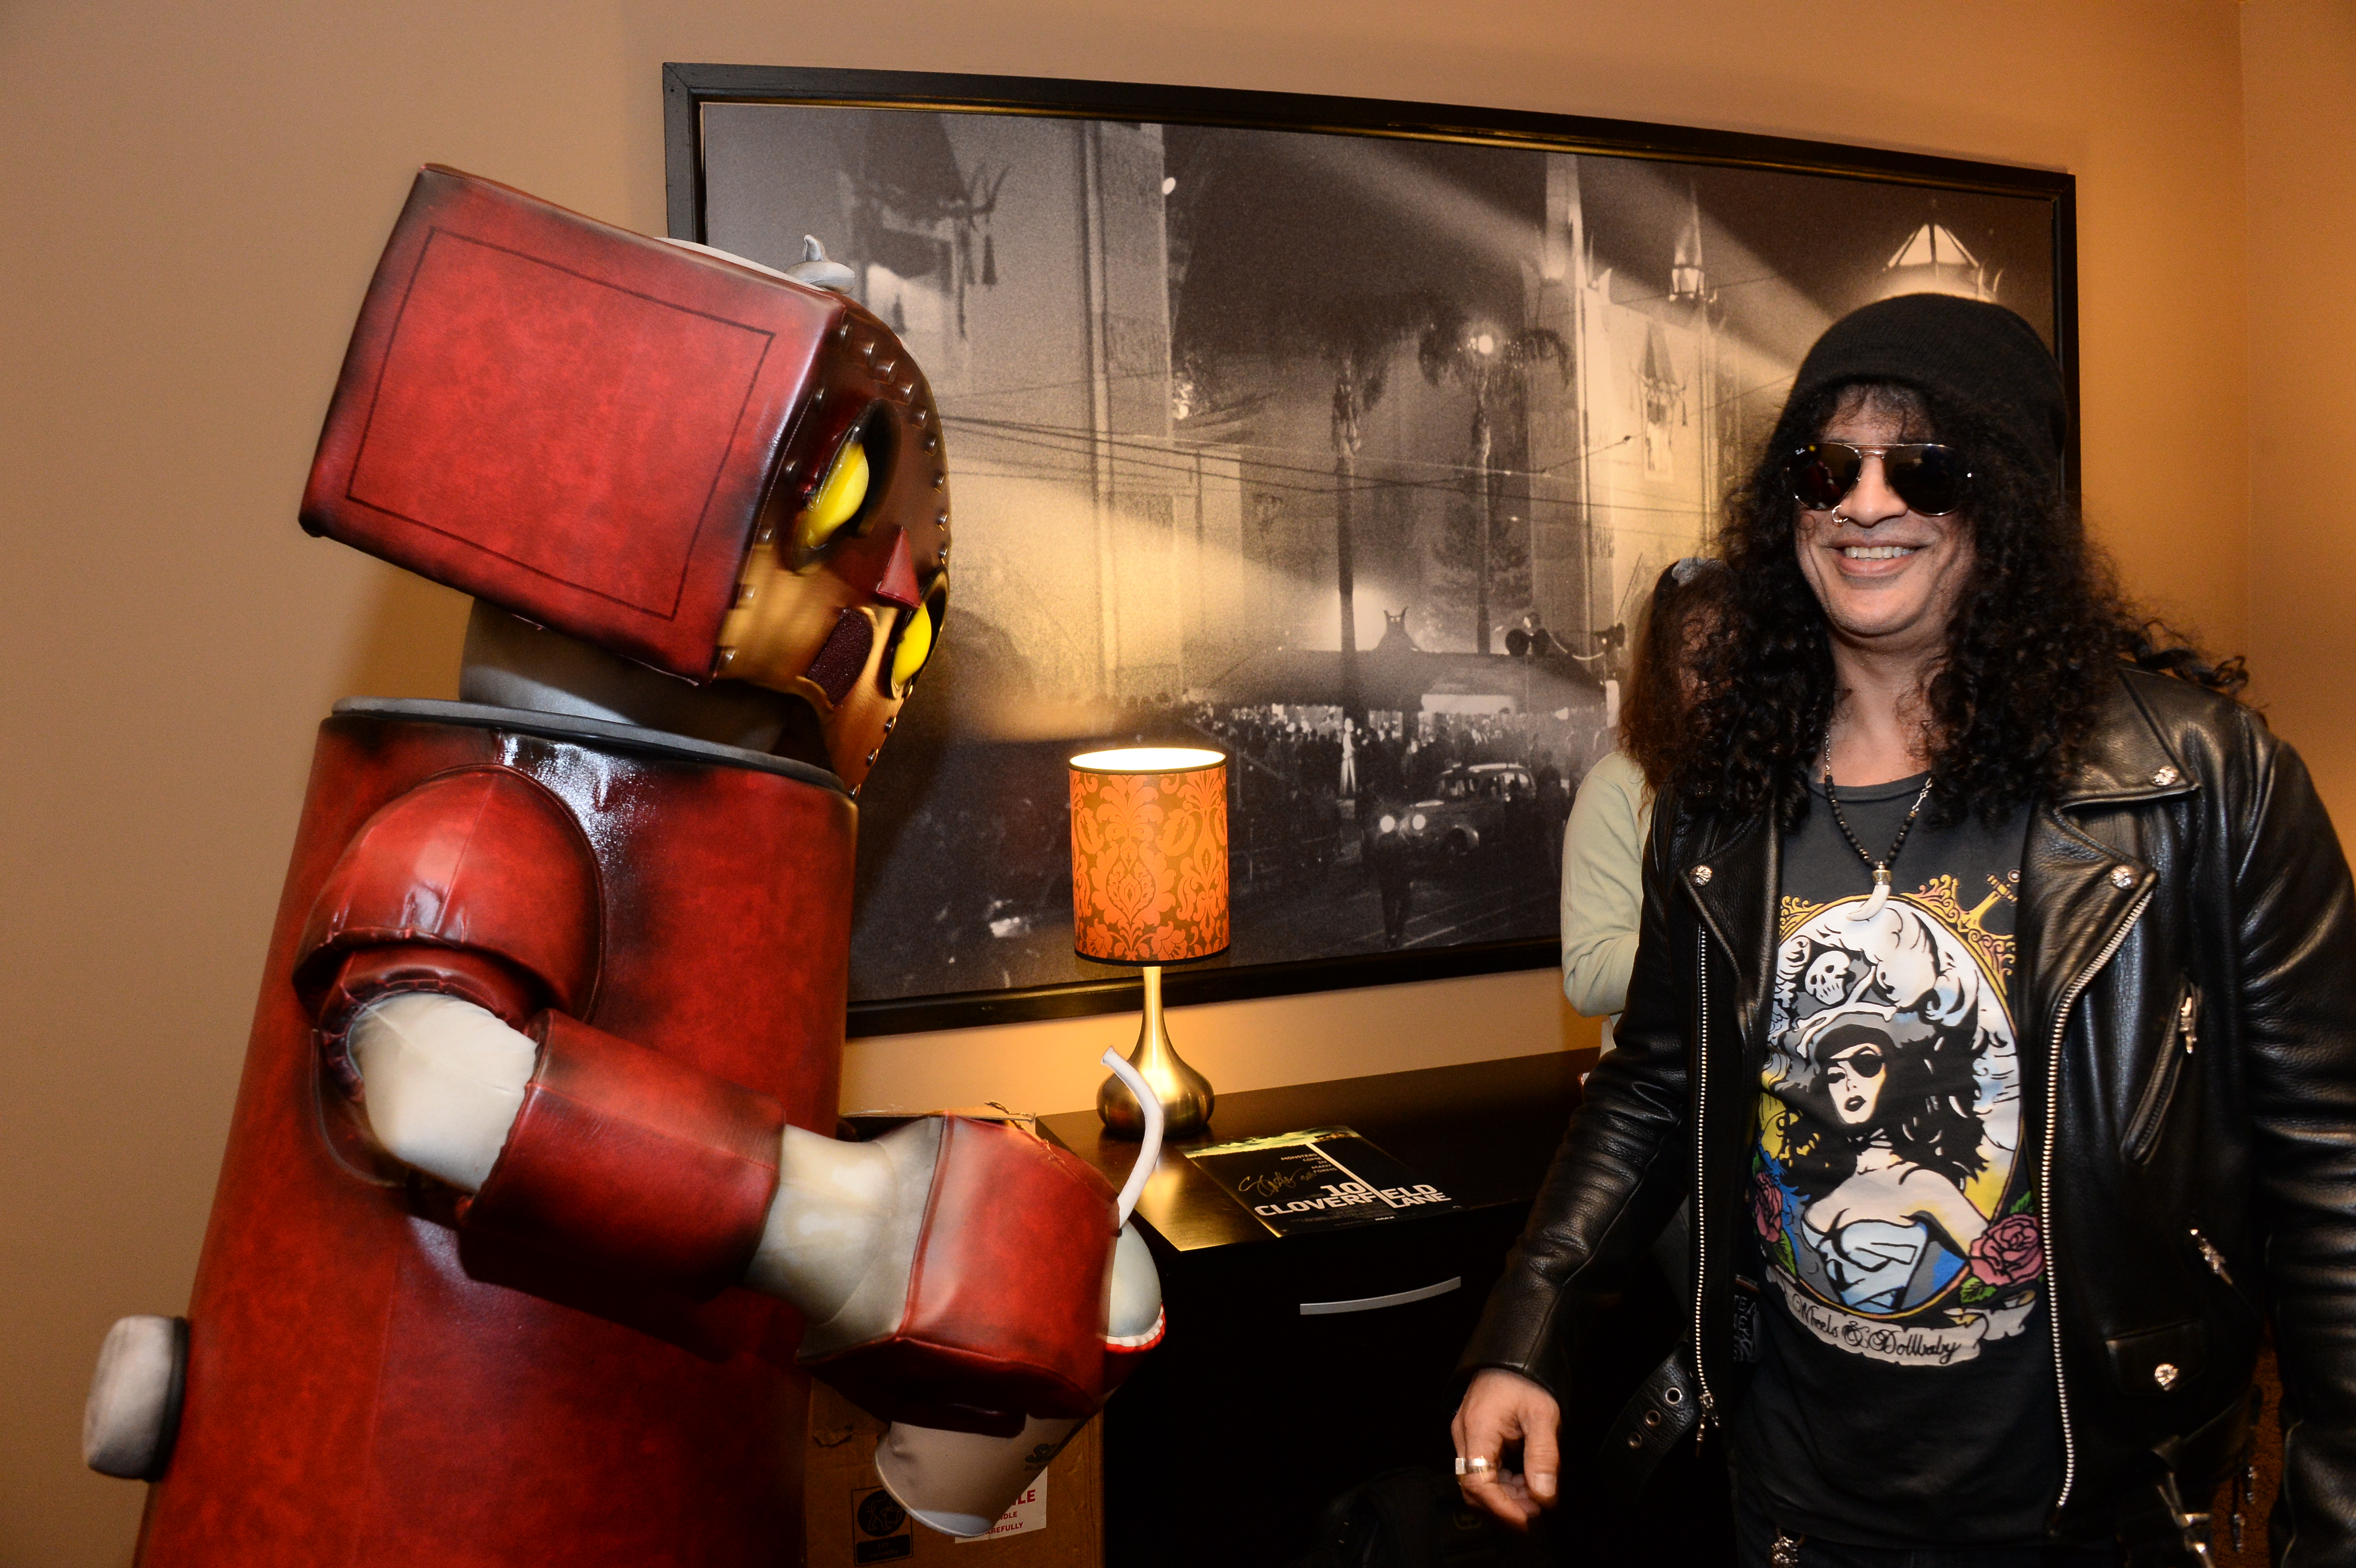 LOS ANGELES, CA - MARCH 10:  Guns N' Roses guitarist Slash attends Coverfield Lane Private Screening hosted By Slash at Paramount Pictures on March 10, 2016 in Los Angeles, California.  (Photo by Frazer Harrison/Getty Images for Paramount Pictures)